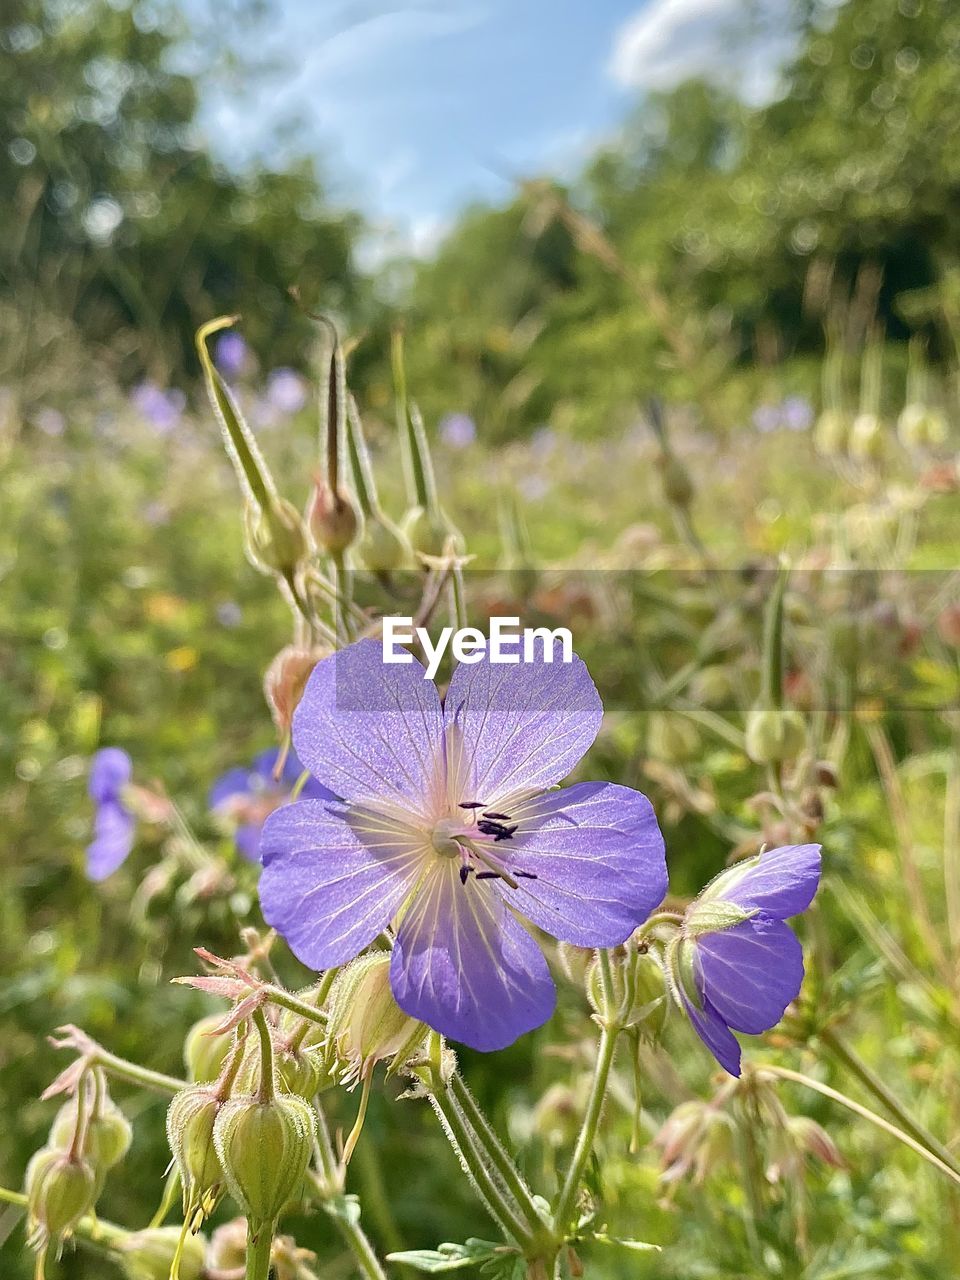 plant, flower, flowering plant, beauty in nature, freshness, purple, nature, growth, meadow, close-up, fragility, focus on foreground, flower head, wildflower, inflorescence, petal, no people, sky, field, day, blossom, outdoors, botany, springtime, land, sunlight, summer, landscape, environment, prairie, green